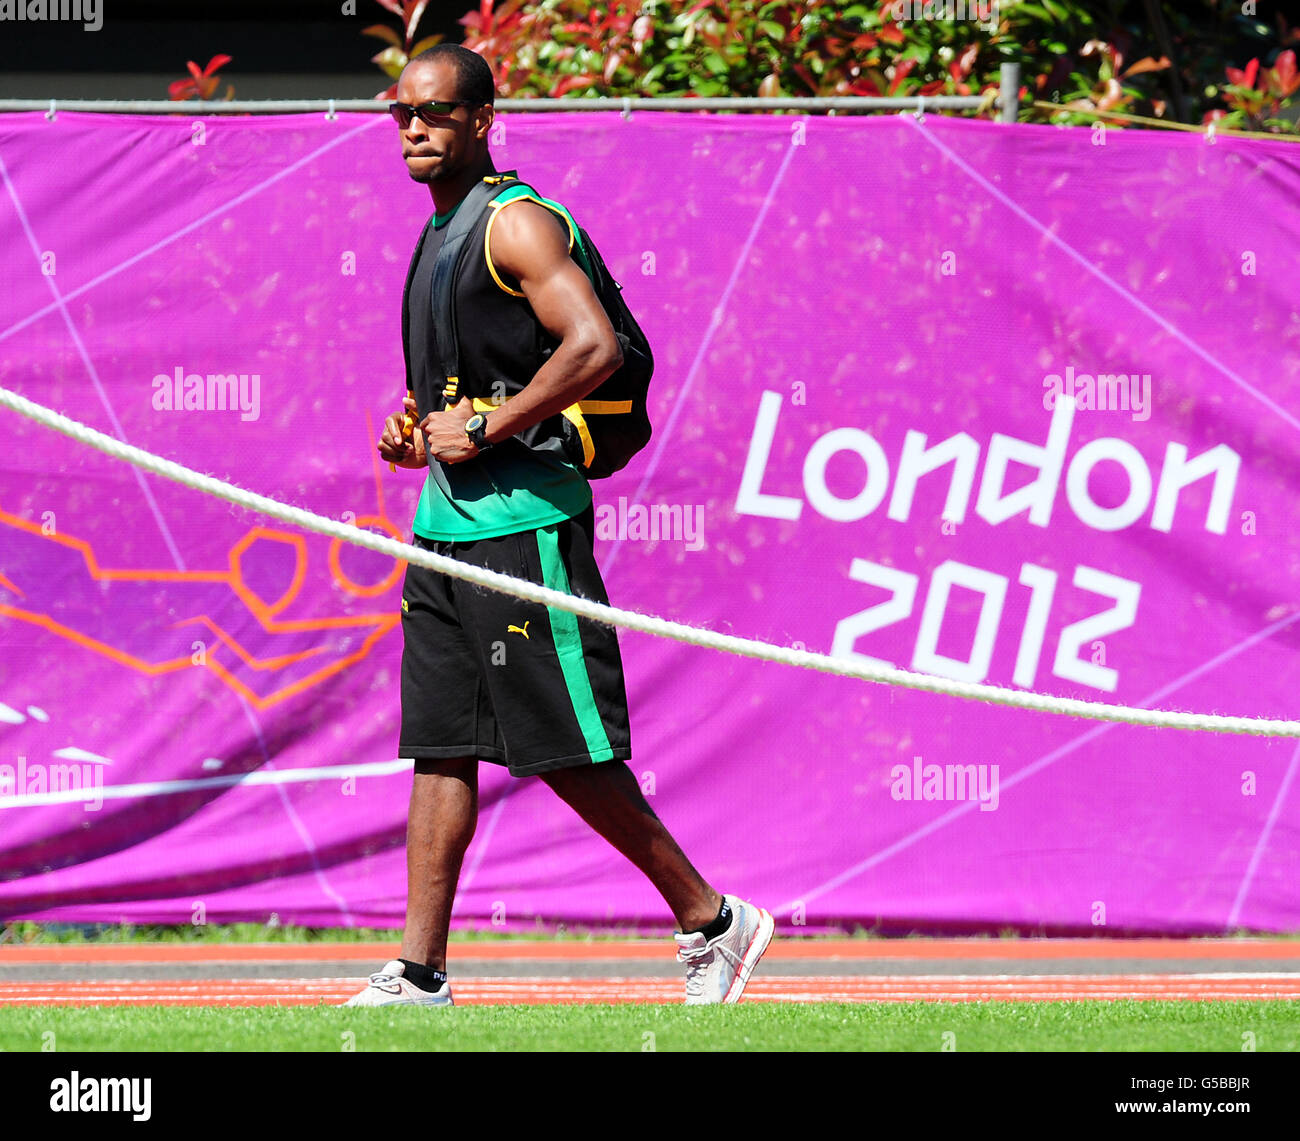 Members Of The Jamaican Track And Field Team Roxroy Cato During The